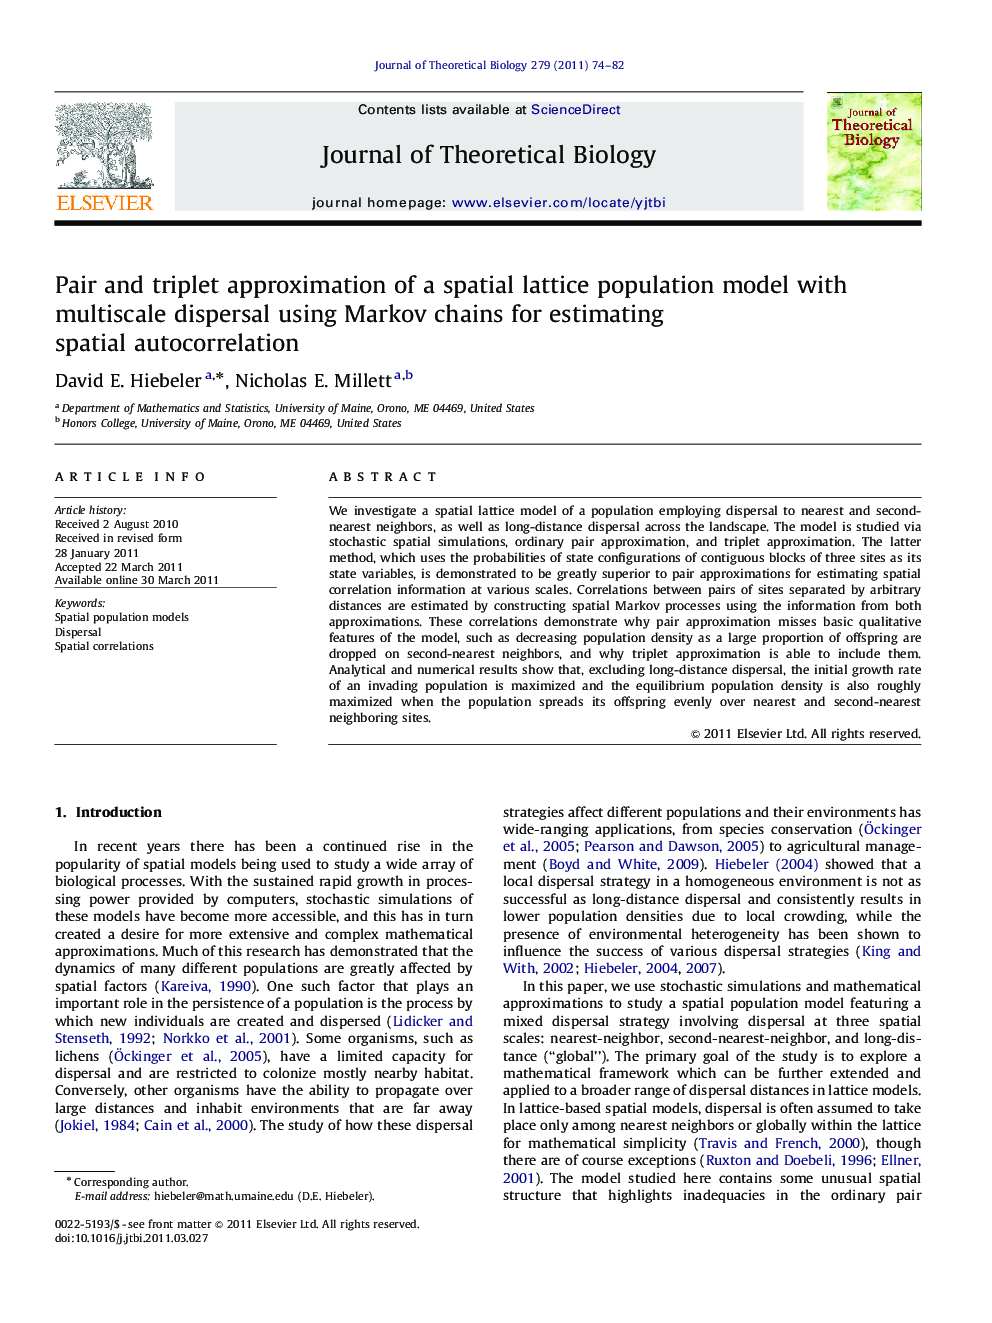 Pair and triplet approximation of a spatial lattice population model with multiscale dispersal using Markov chains for estimating spatial autocorrelation